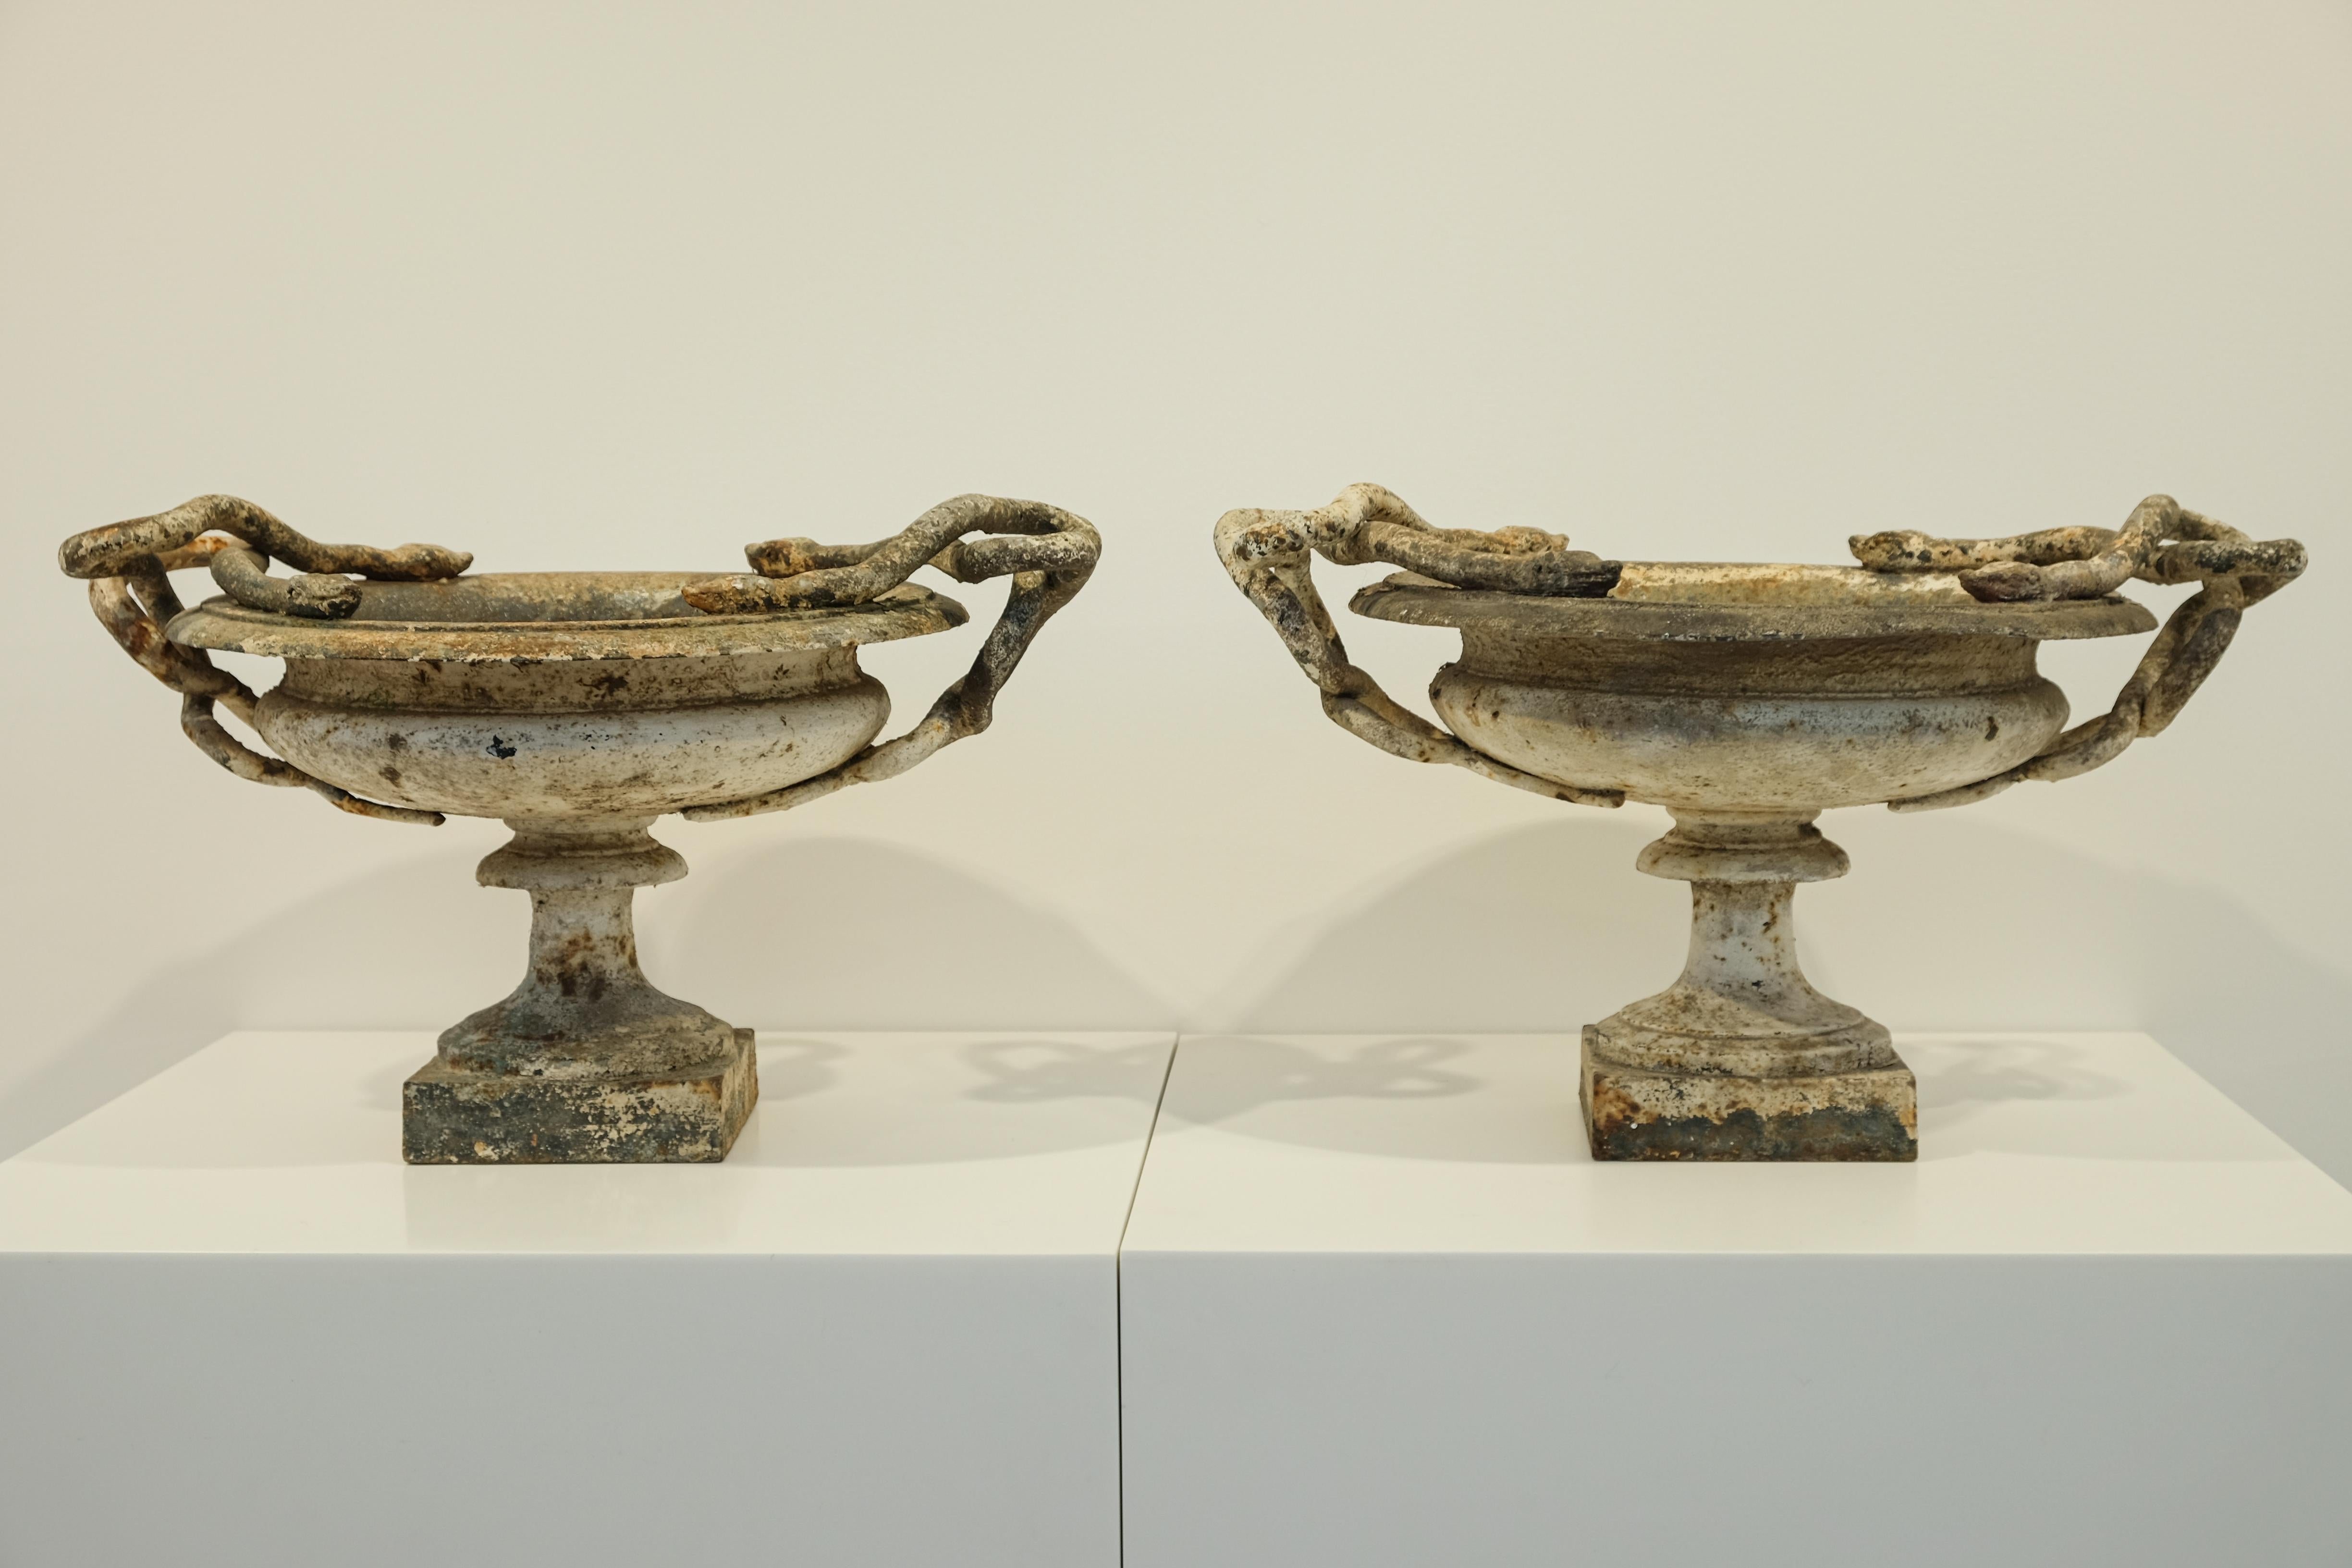 A small pair of white cast-iron urns with intertwined snakes. Marked with a “1” to denote the smallest of three sizes made by the renowned Val d’Osne Foundry. The smallest size is particularly rare. Exquisite tones of white, brown, and rust with a